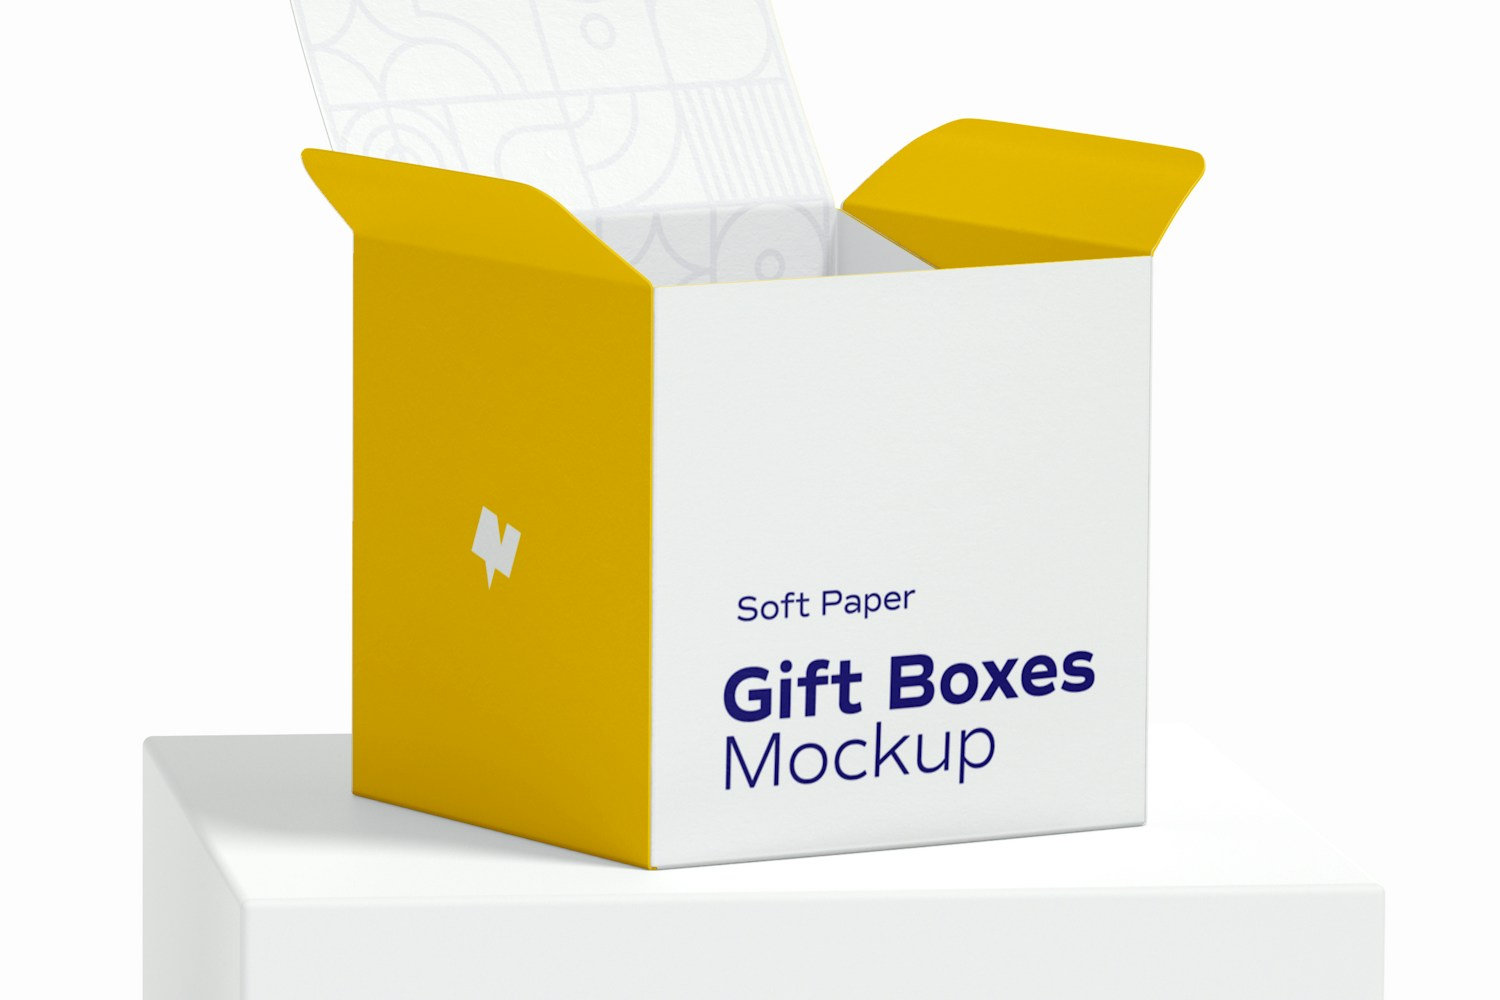 Soft Paper Gift Boxes Mockup, Front View